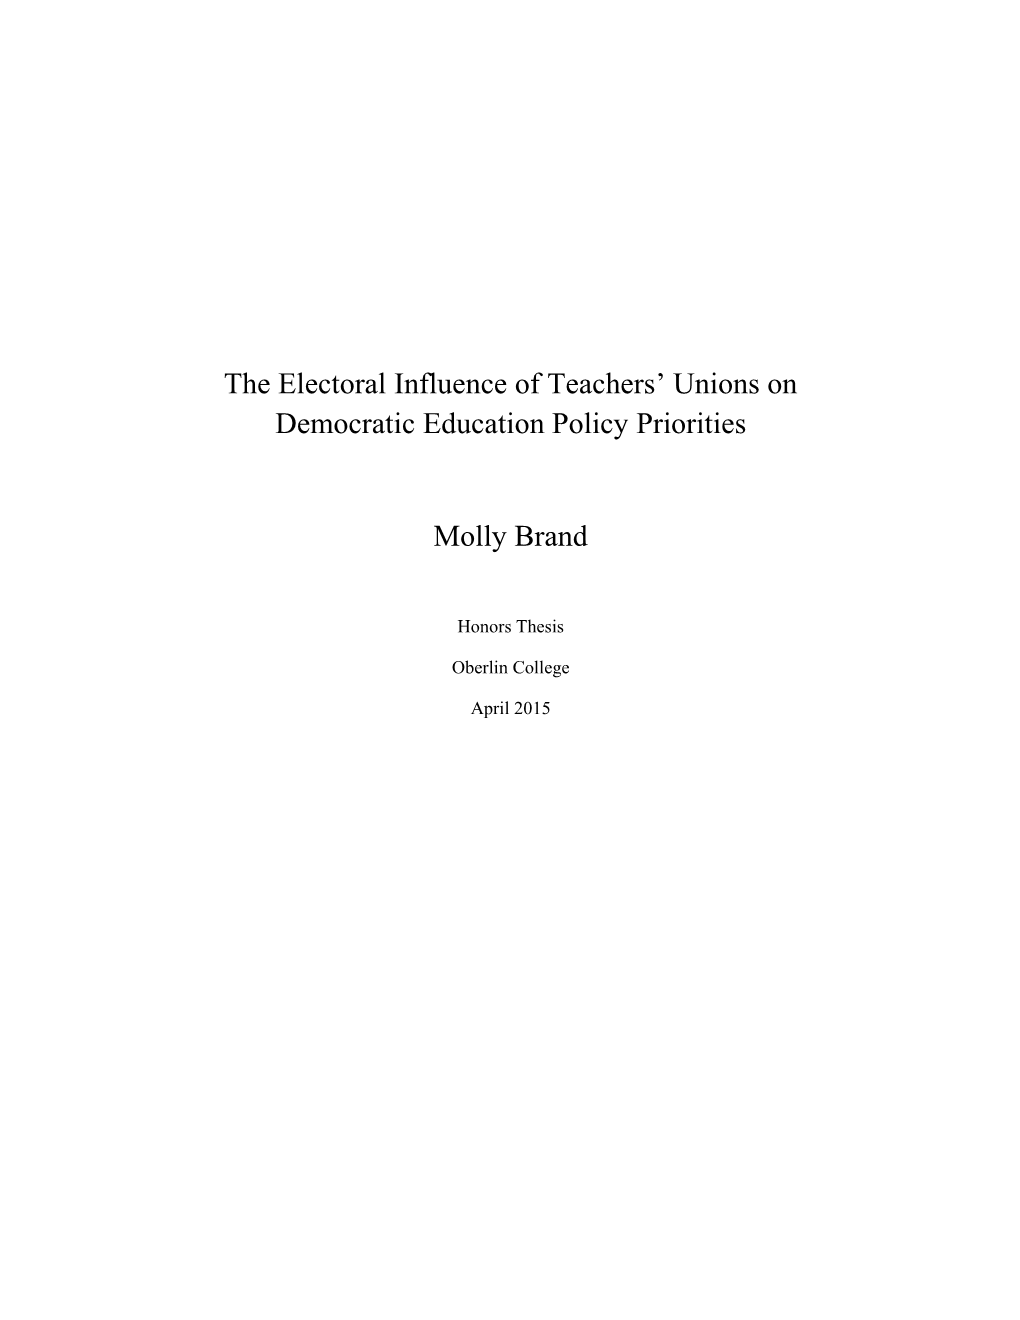 The Electoral Influence of Teachers' Unions on Democratic Education